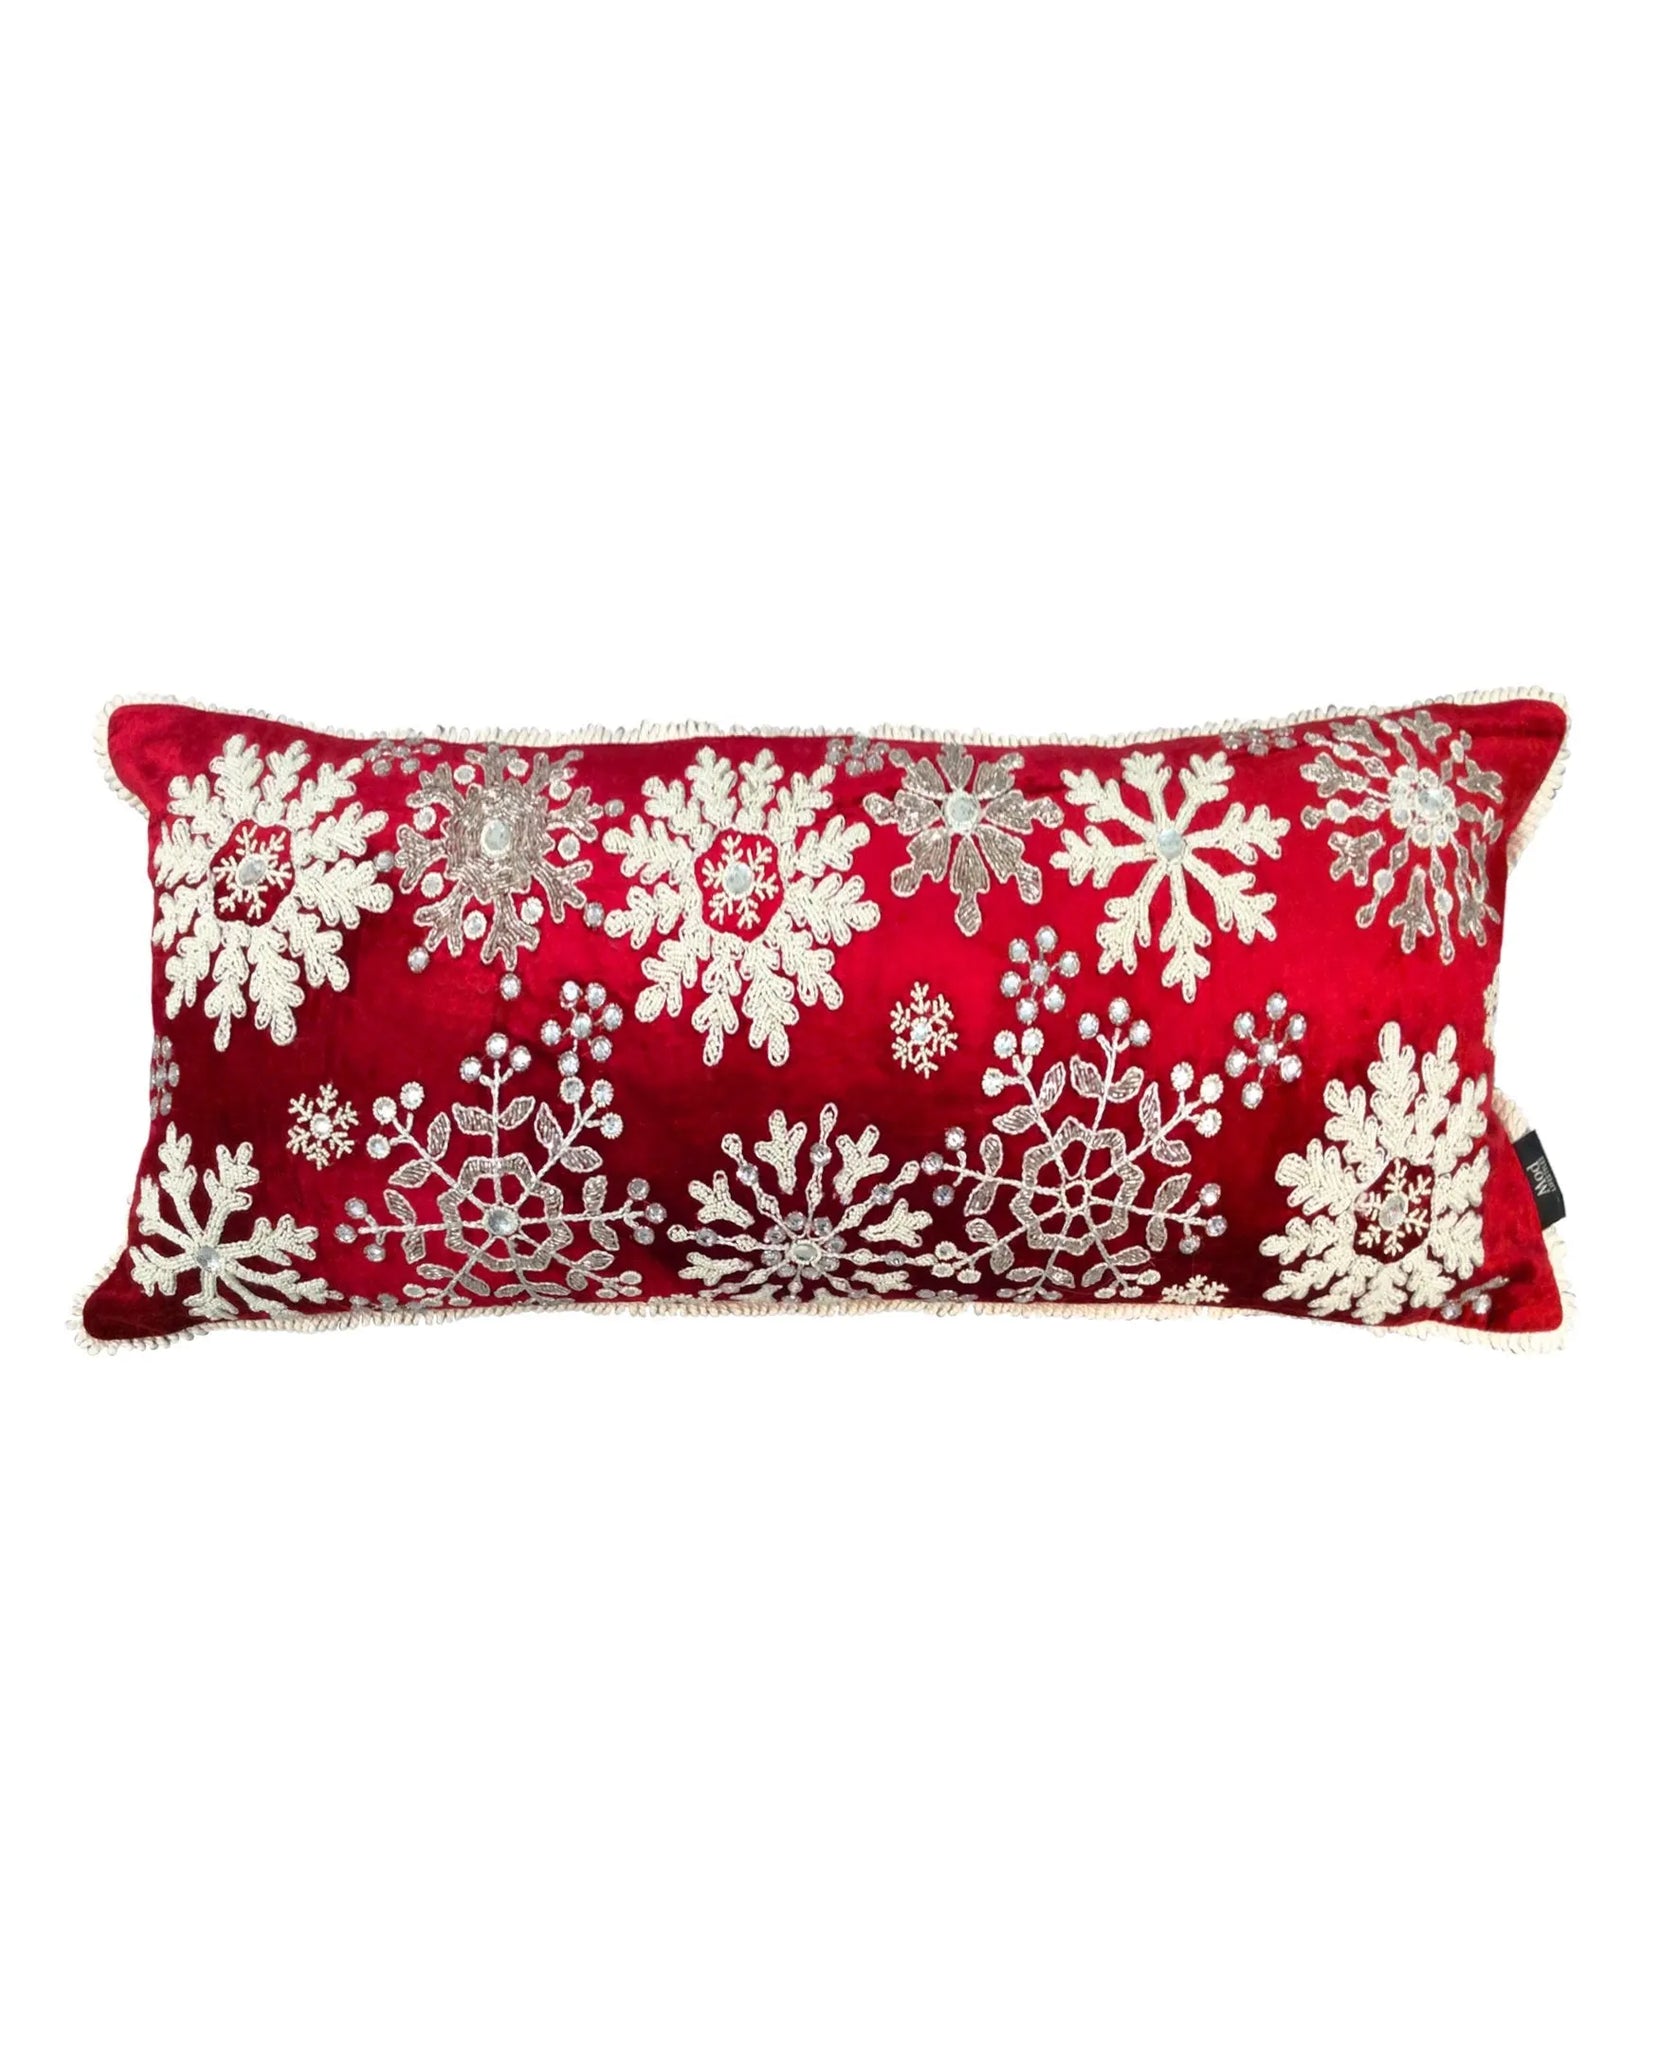 All-Over Beaded Snowflakes Pillow, Red/White - 14" x 36" home decor - Mod Lifestyles